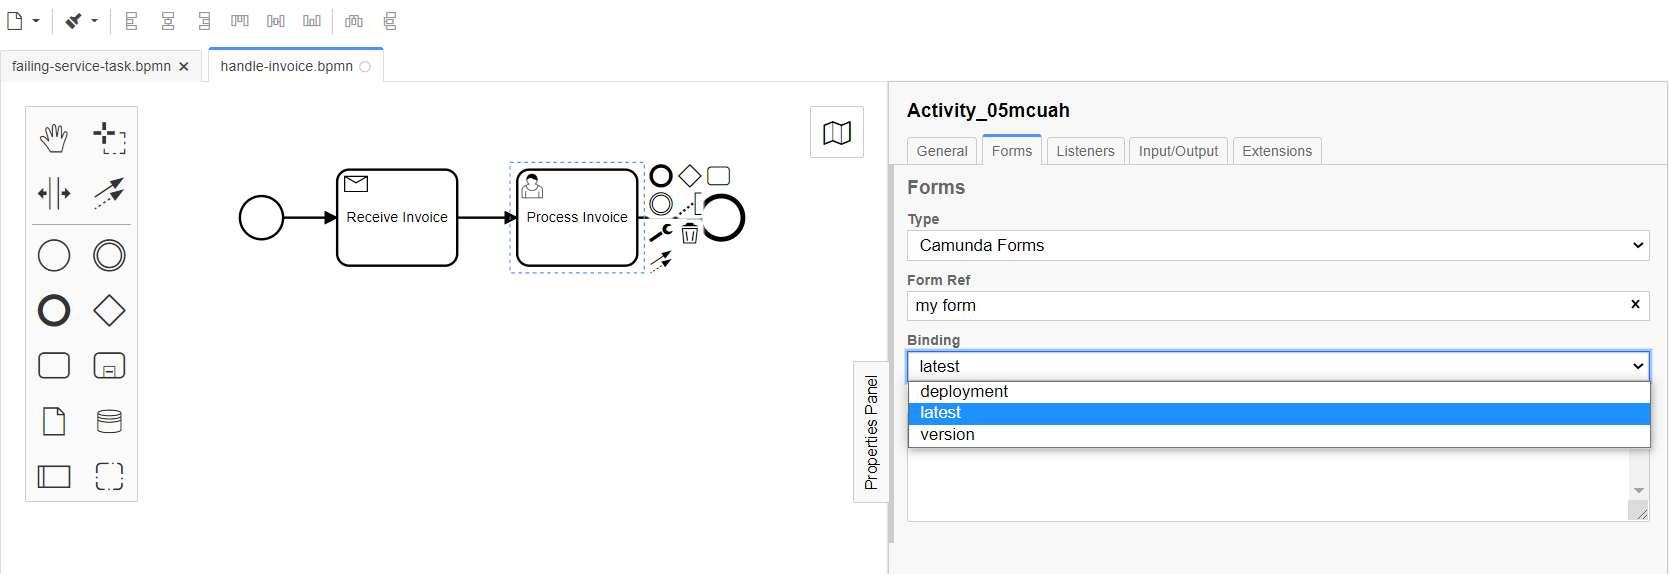 A screenshot of Tasklist showing how to bind a user task to forms